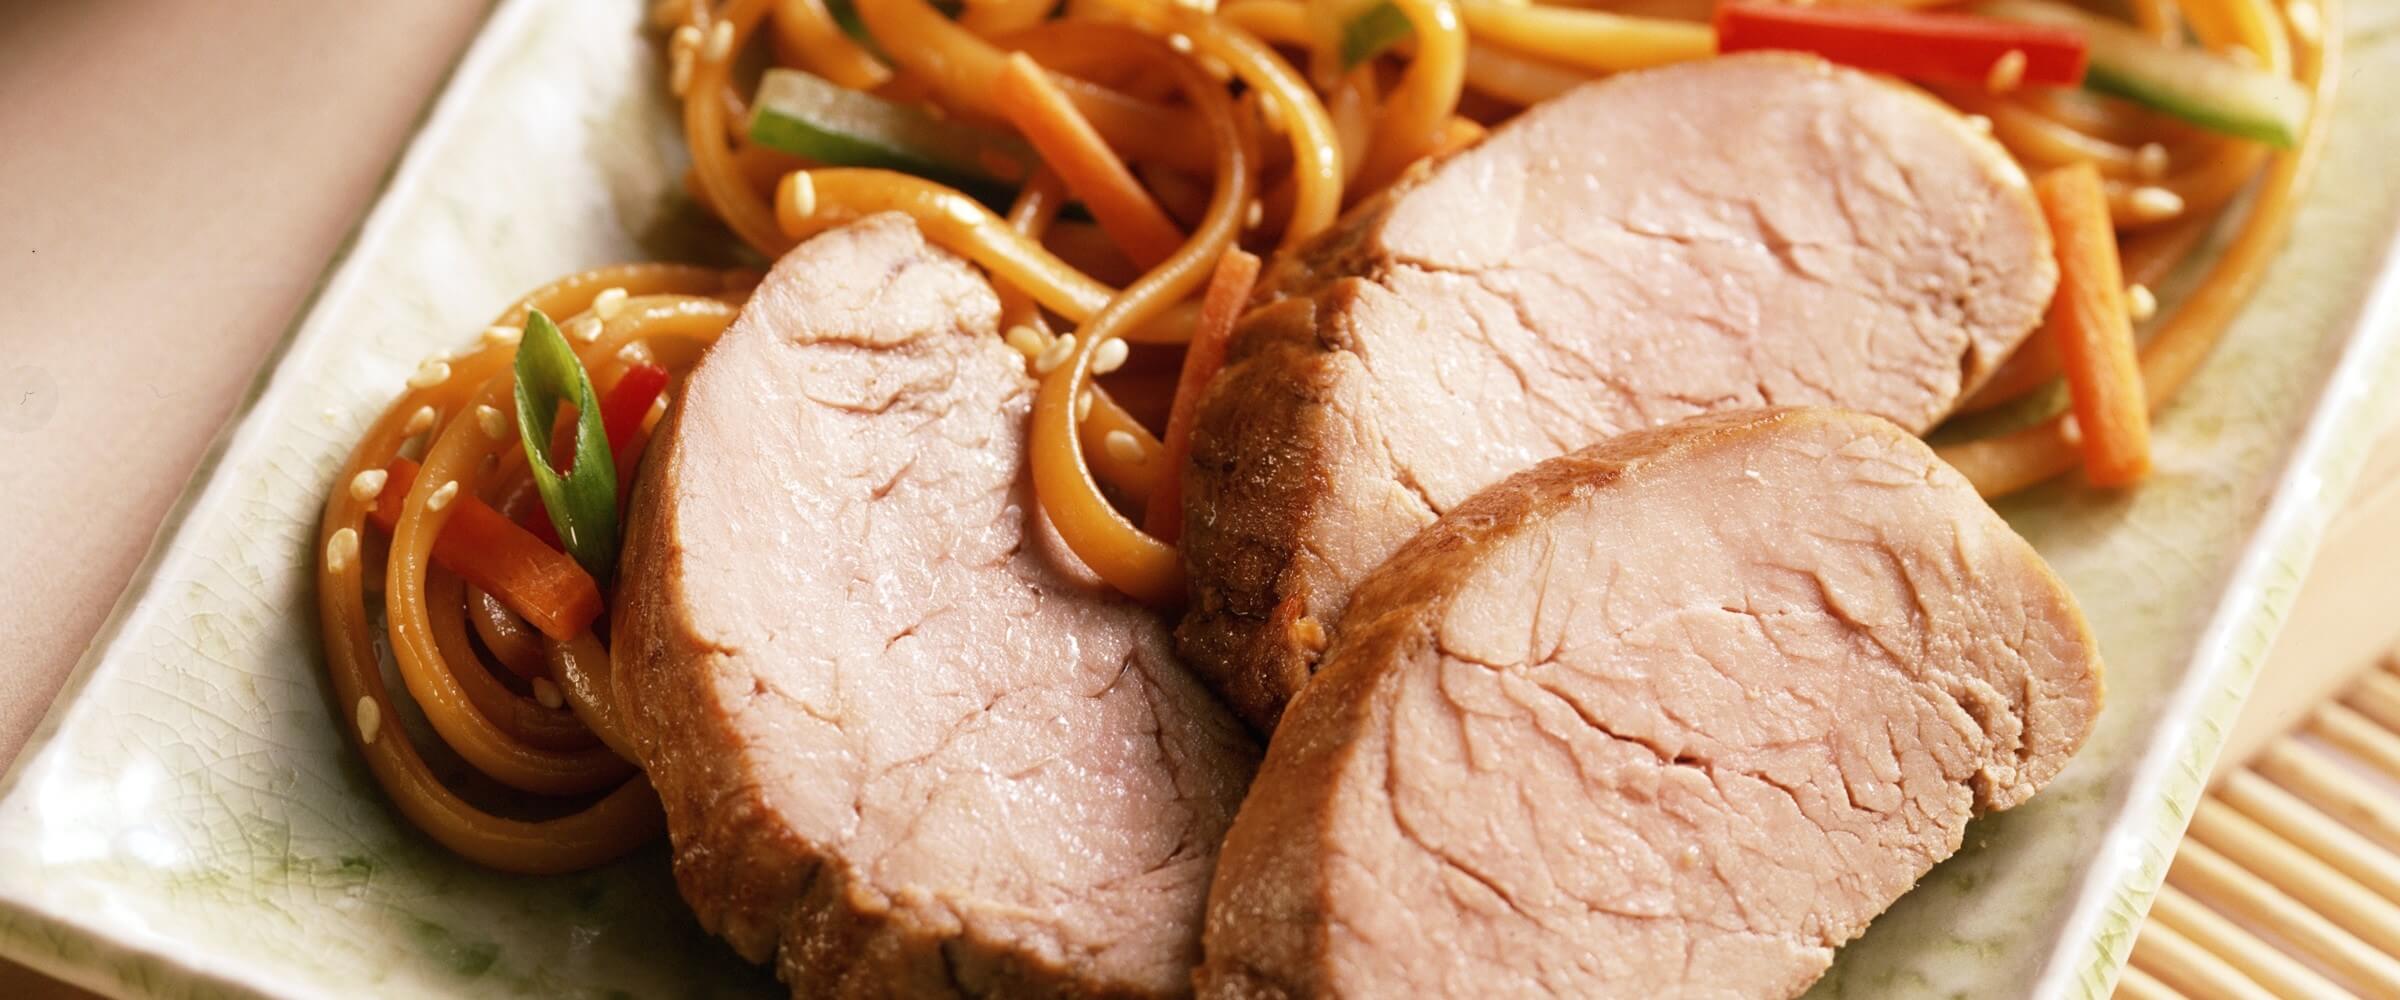 sesame spiced pork lo mein on plate with vegetables